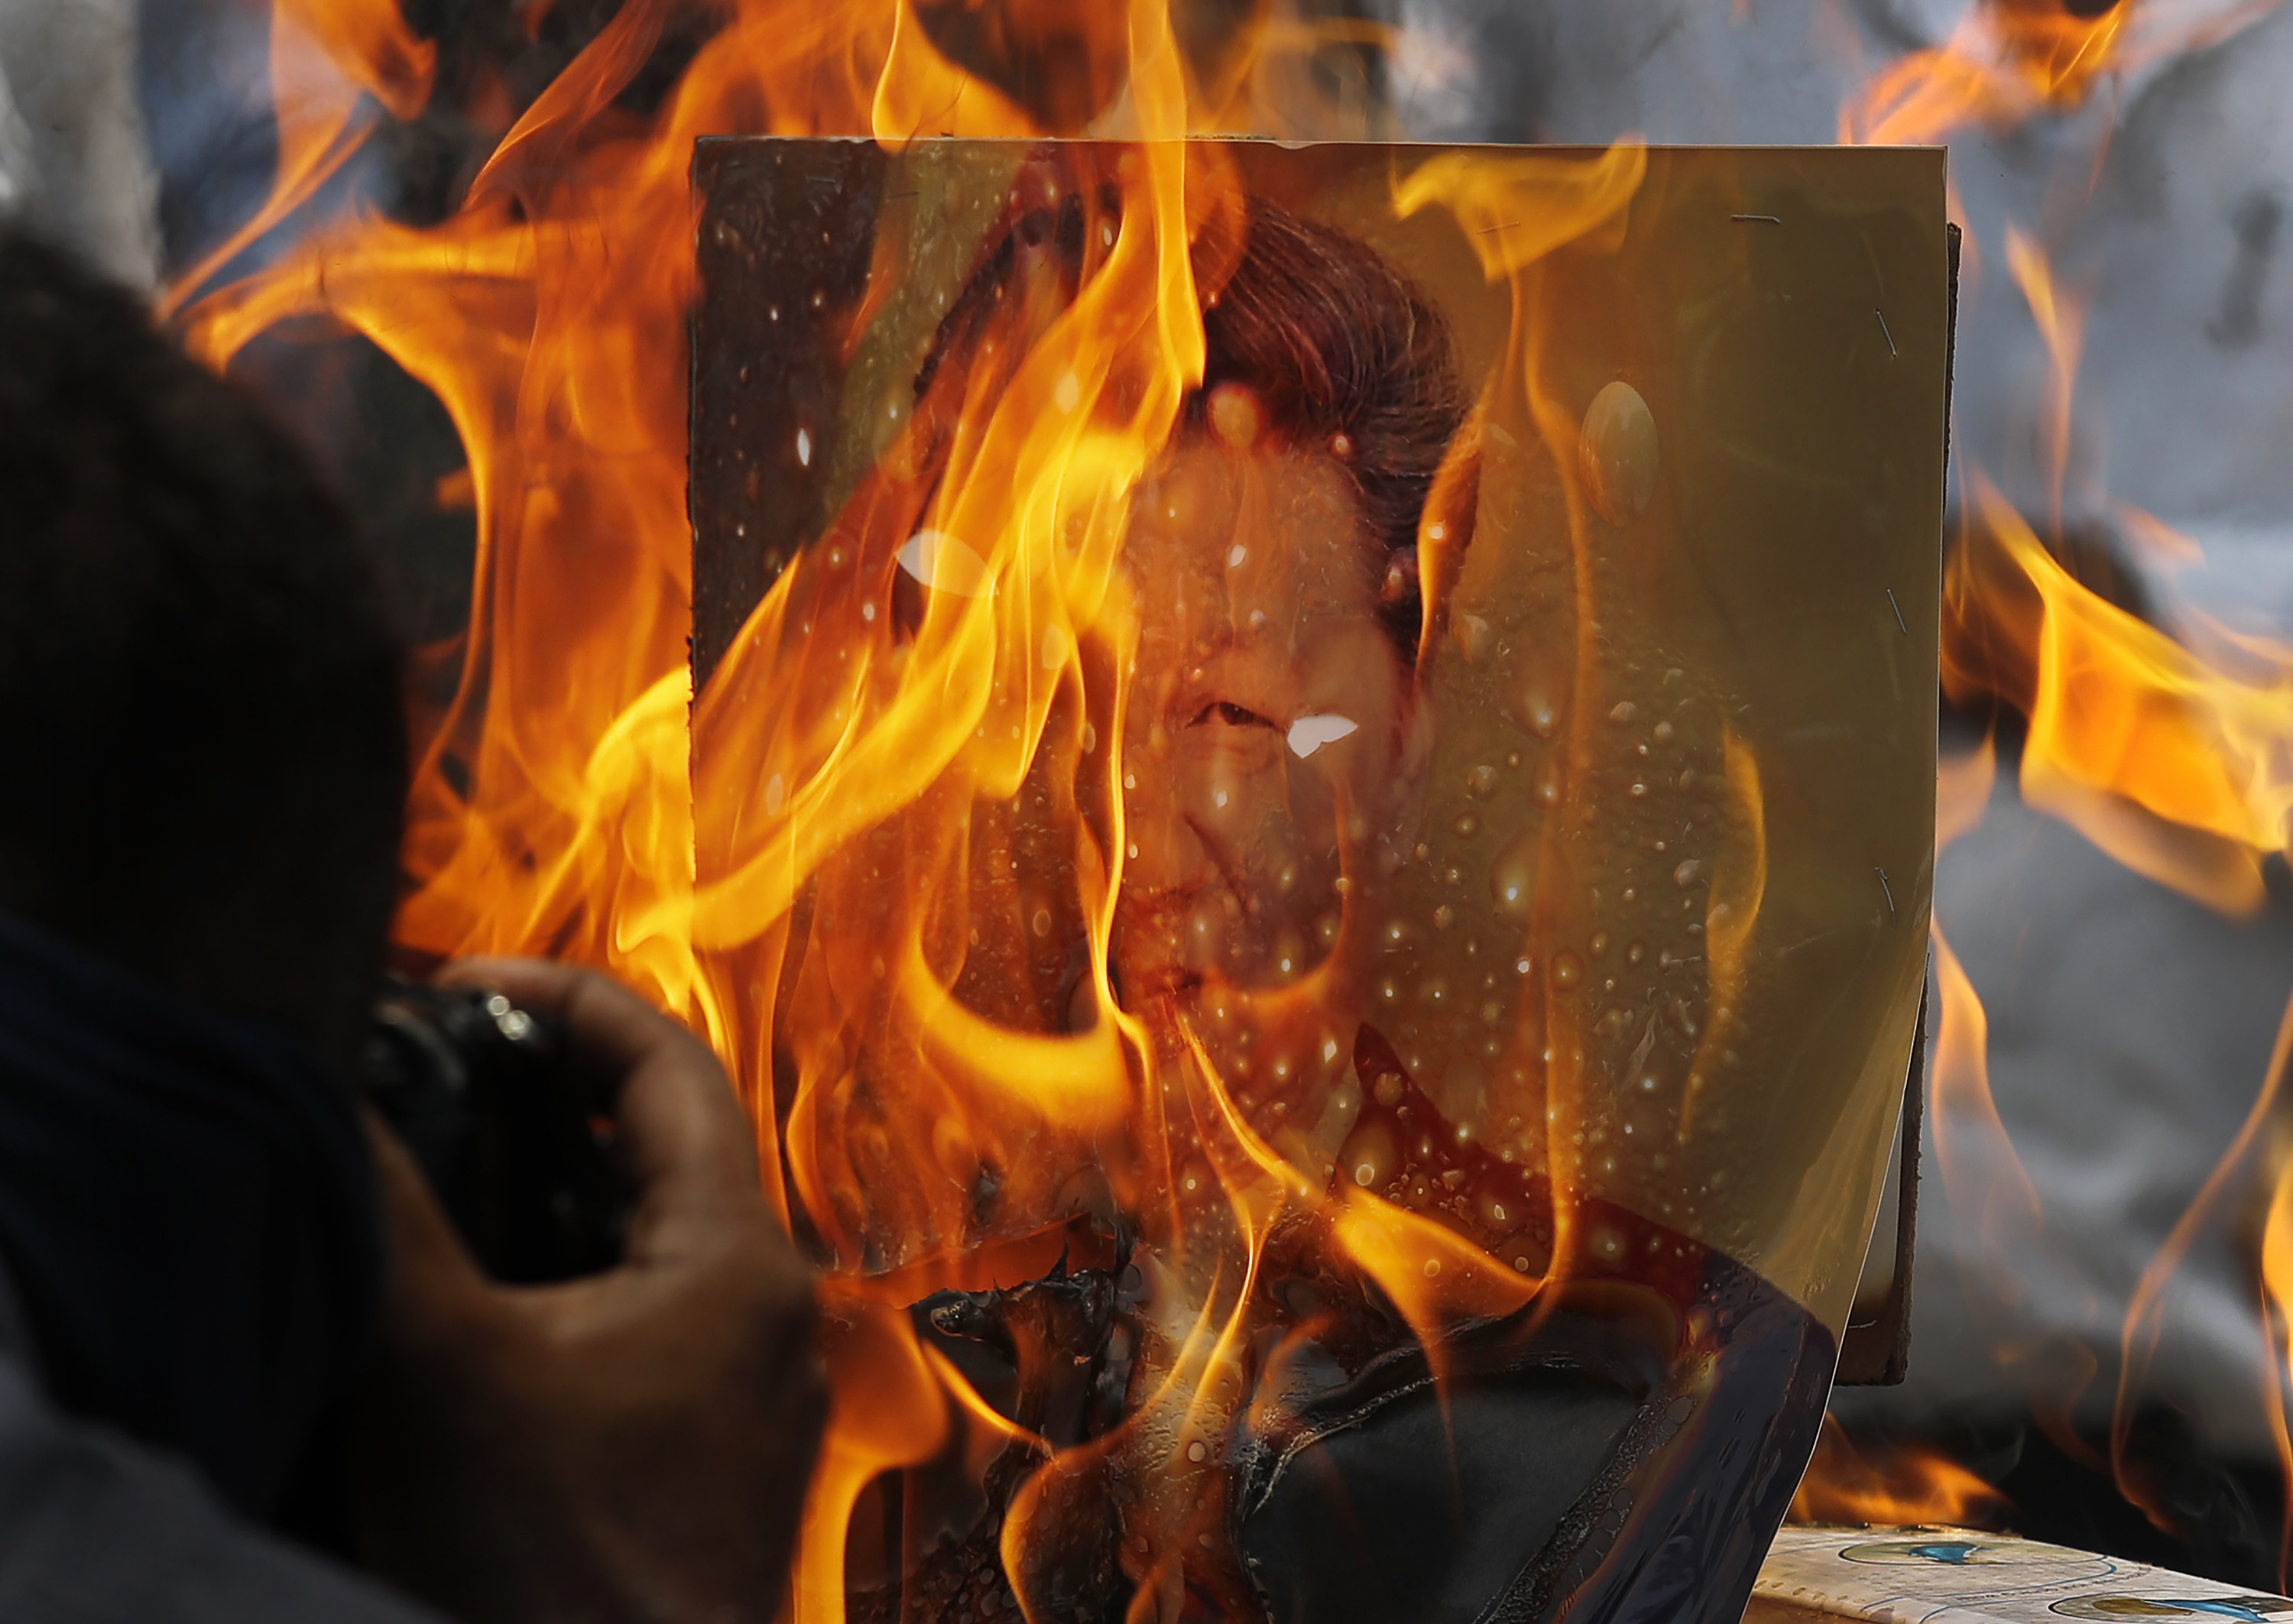 Indian traders in New Delhi react to the killing of Indian soldiers in a deadly border clash in the Ladakh region in June 2020 by burning Chinese products and a poster of President Xi Jinping. Photo: AP